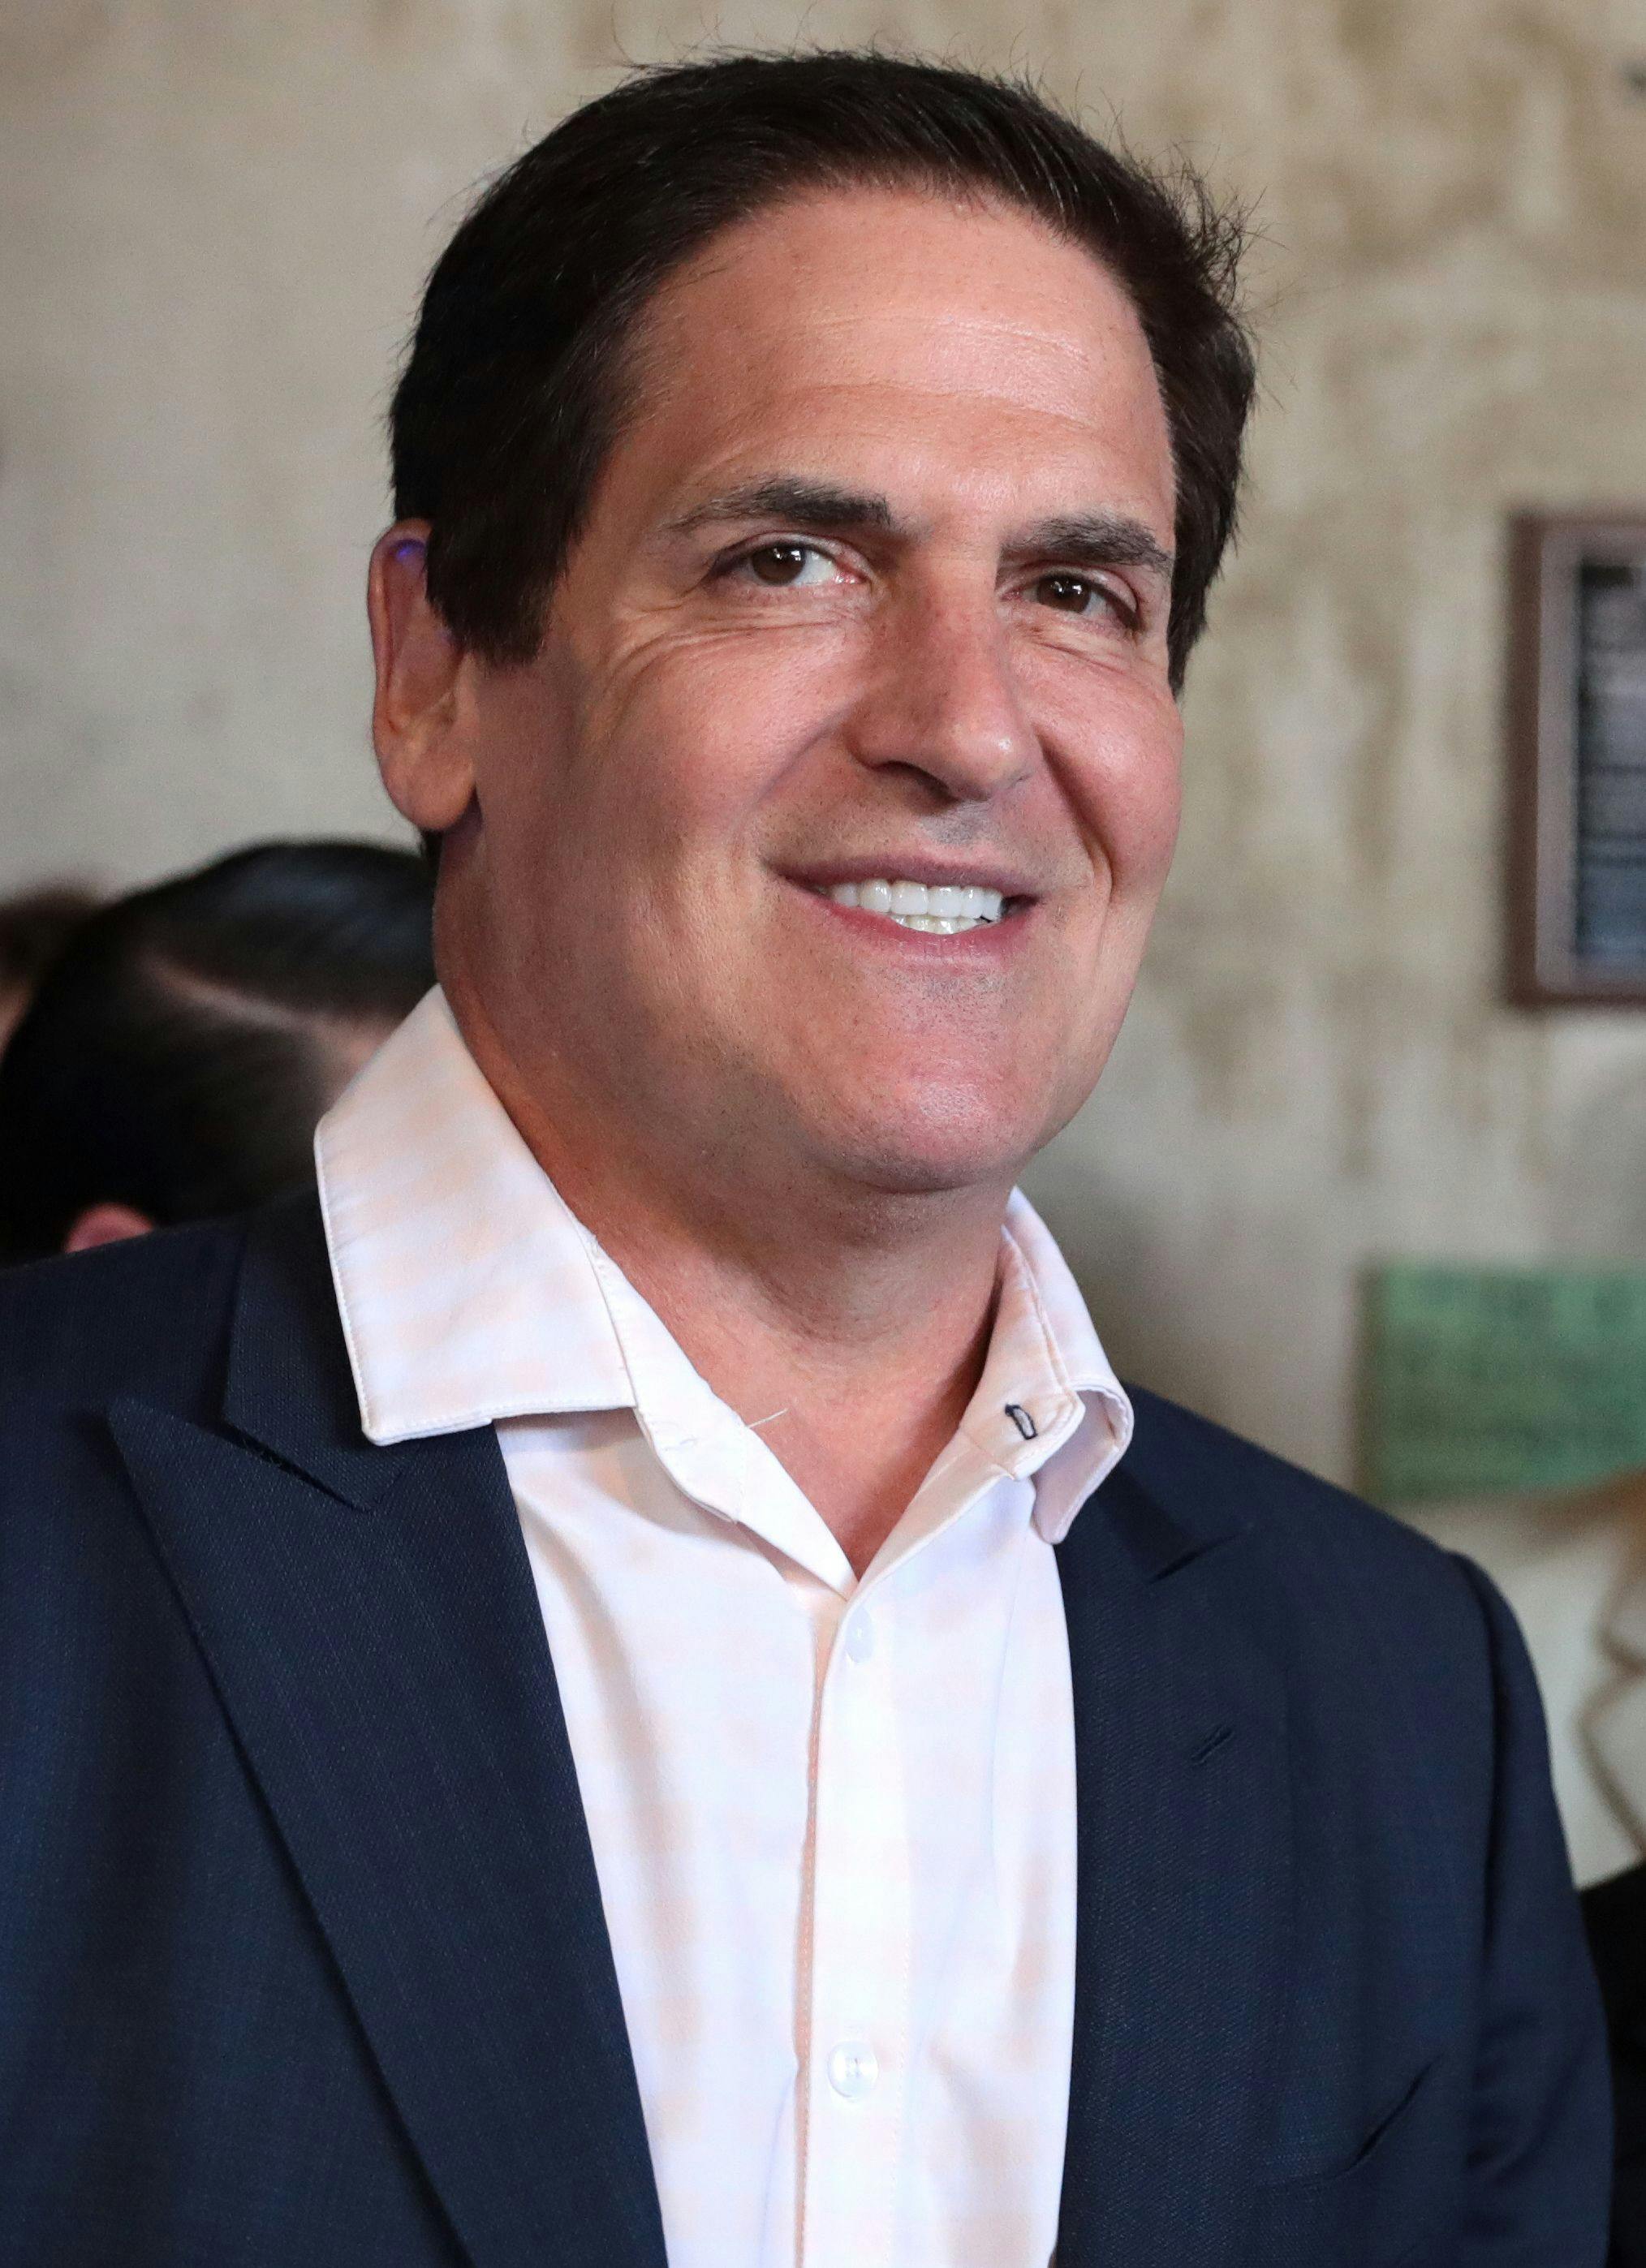 Researchers to Medicare: Mark Cuban Prices Could Have Saved You $3.6 Billion